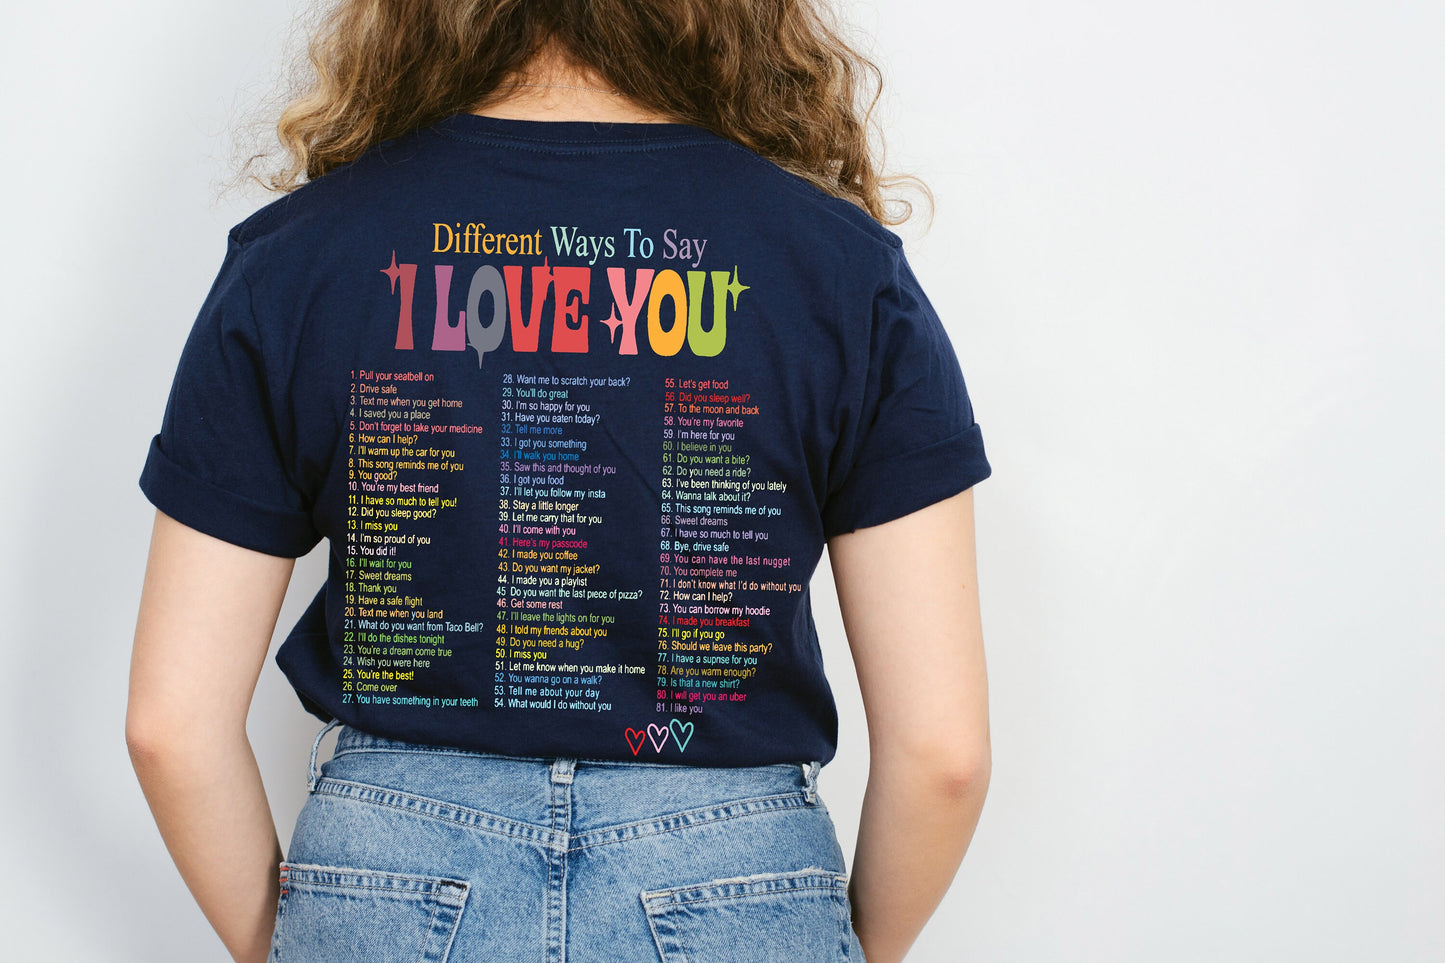 Different Ways to Say I Love You Front and Back Design style Ultra Soft Graphic Tee Unisex Soft Tee T-shirt for Women or Men